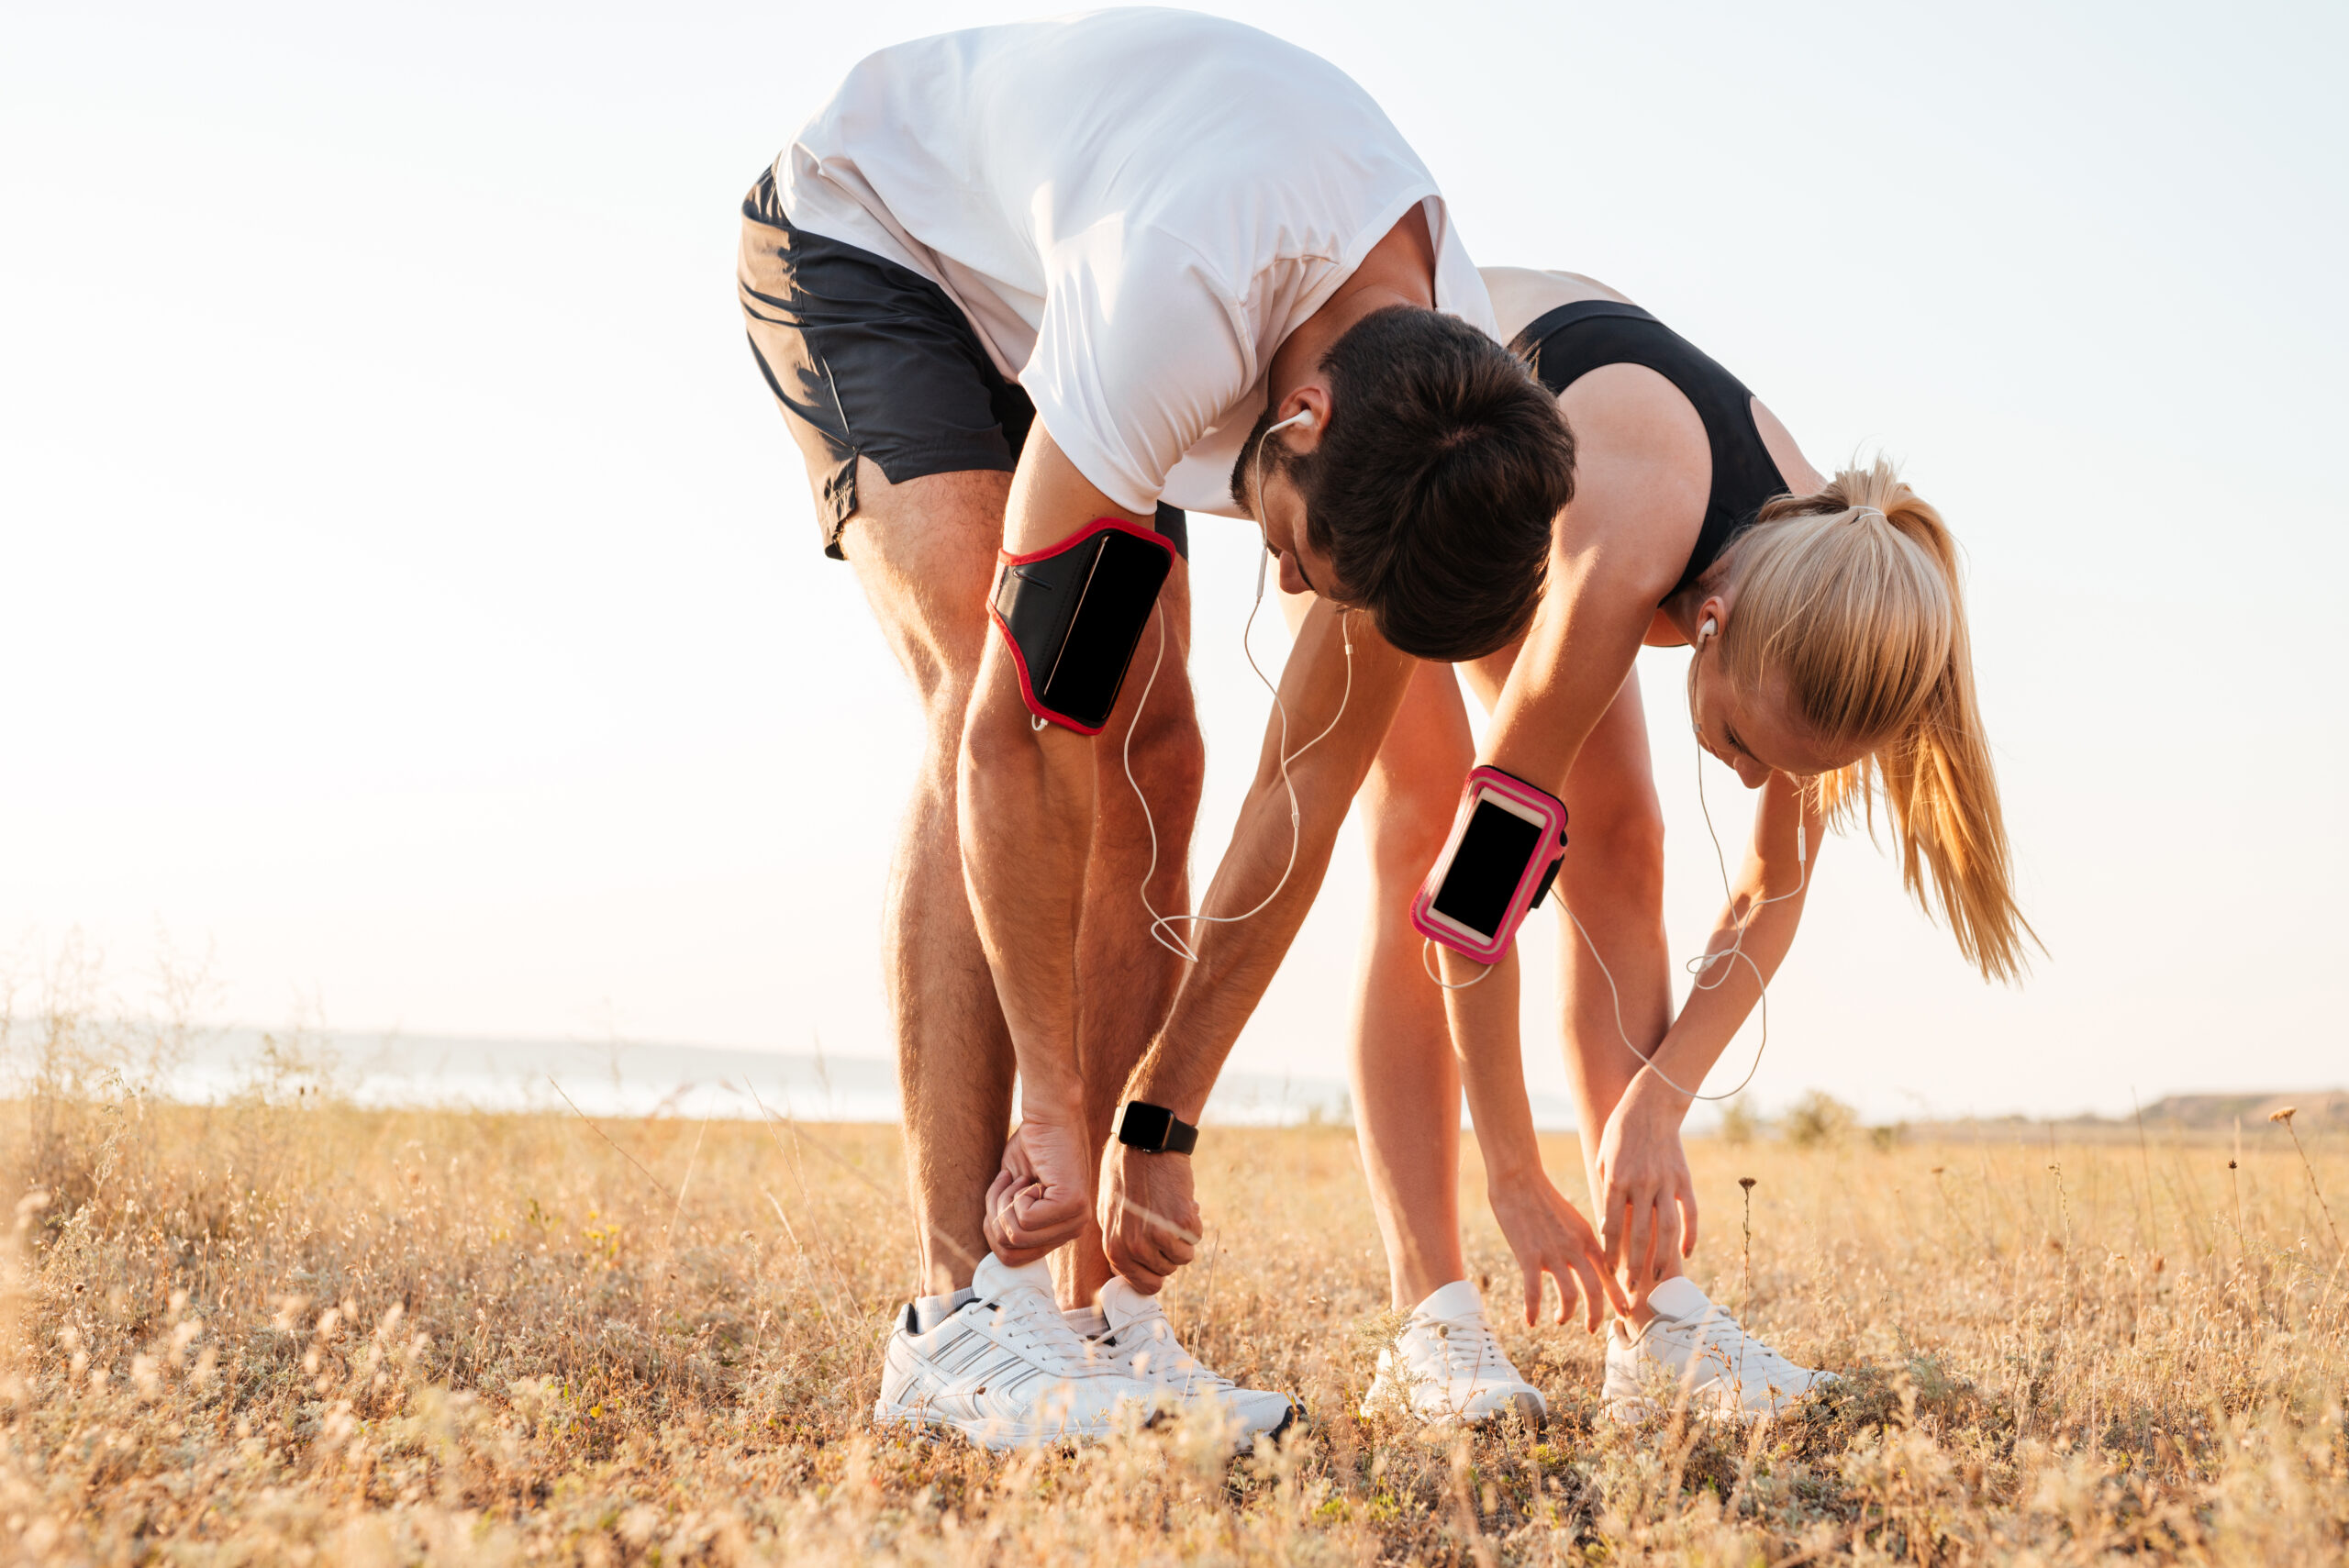 Young couple tying their shoes and getting ready for running and working out together outdoors